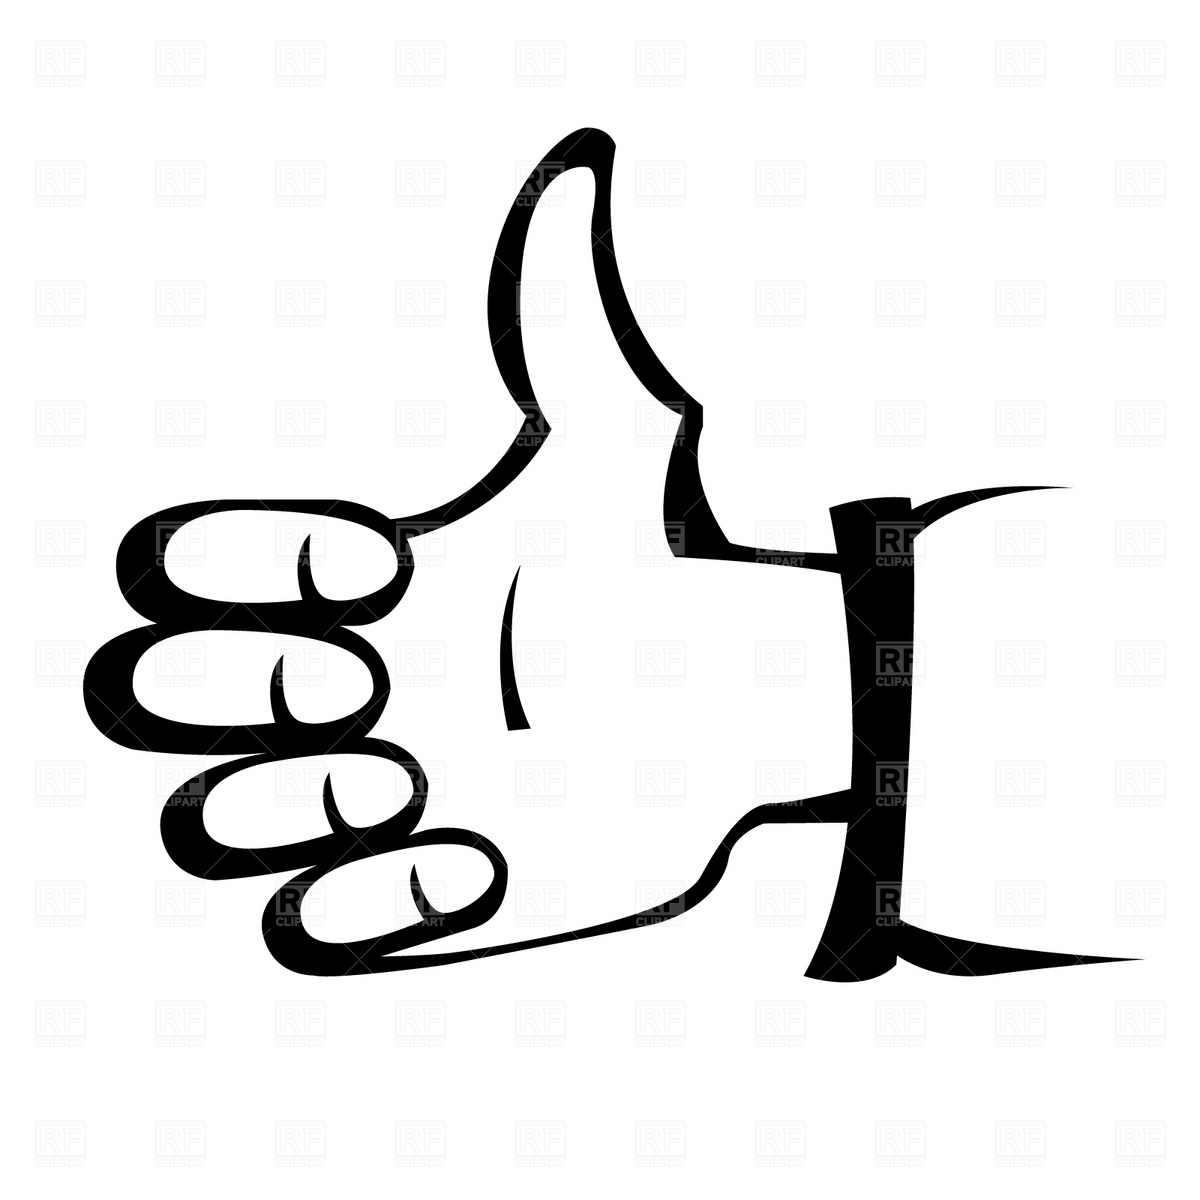 thumbs up clipart free download - photo #28